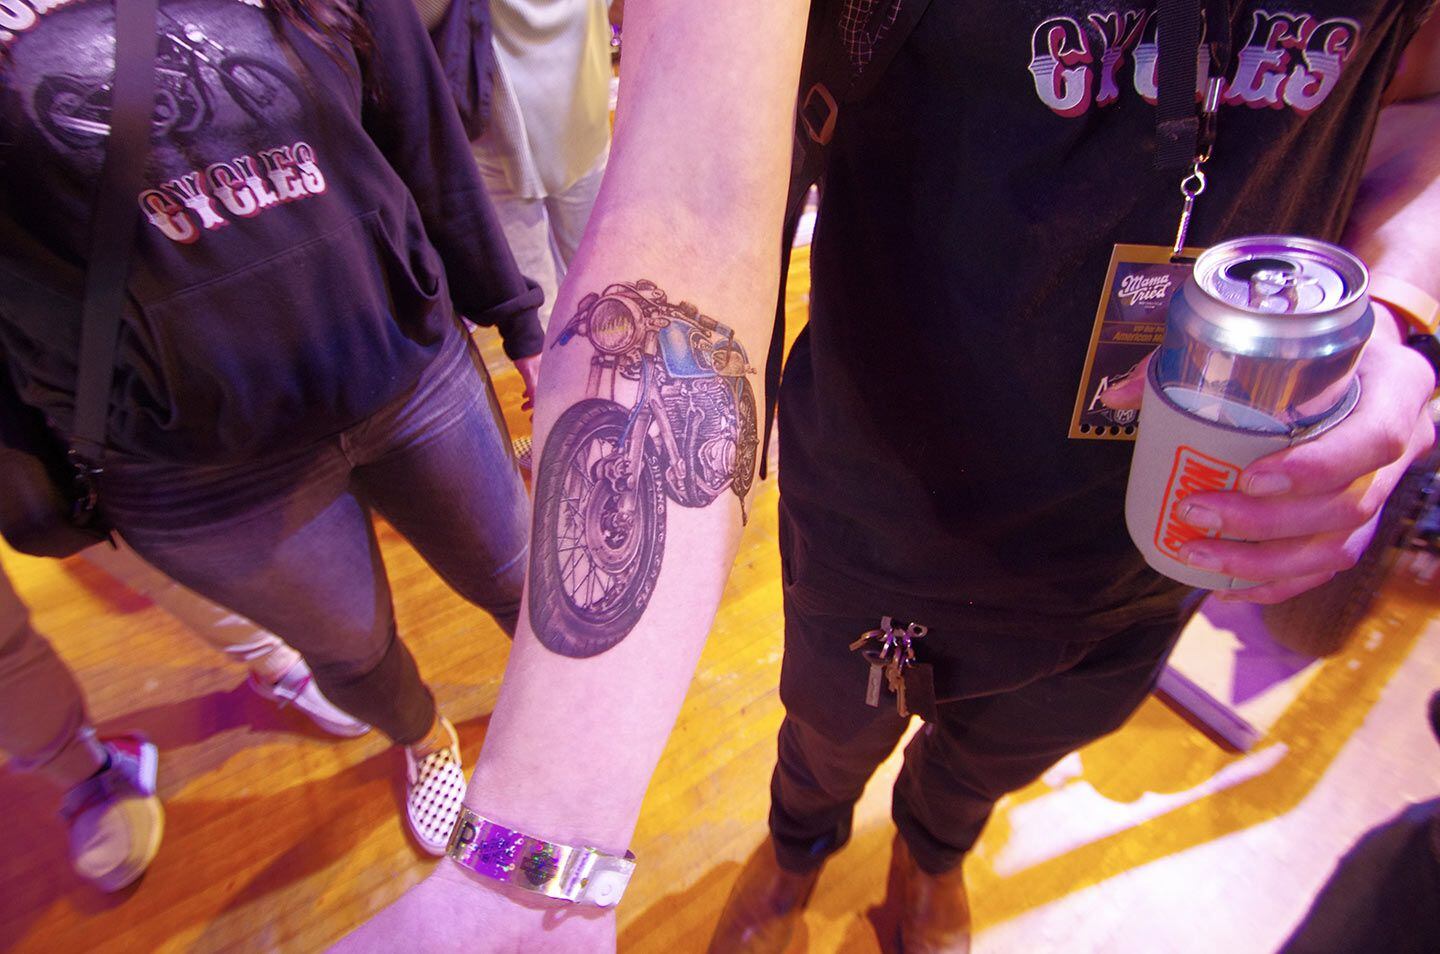 Proof that any motorcycle belongs at this show: Chad Holm’s tattoo of his custom Honda CB360T show entrant, Mama Tried Show.